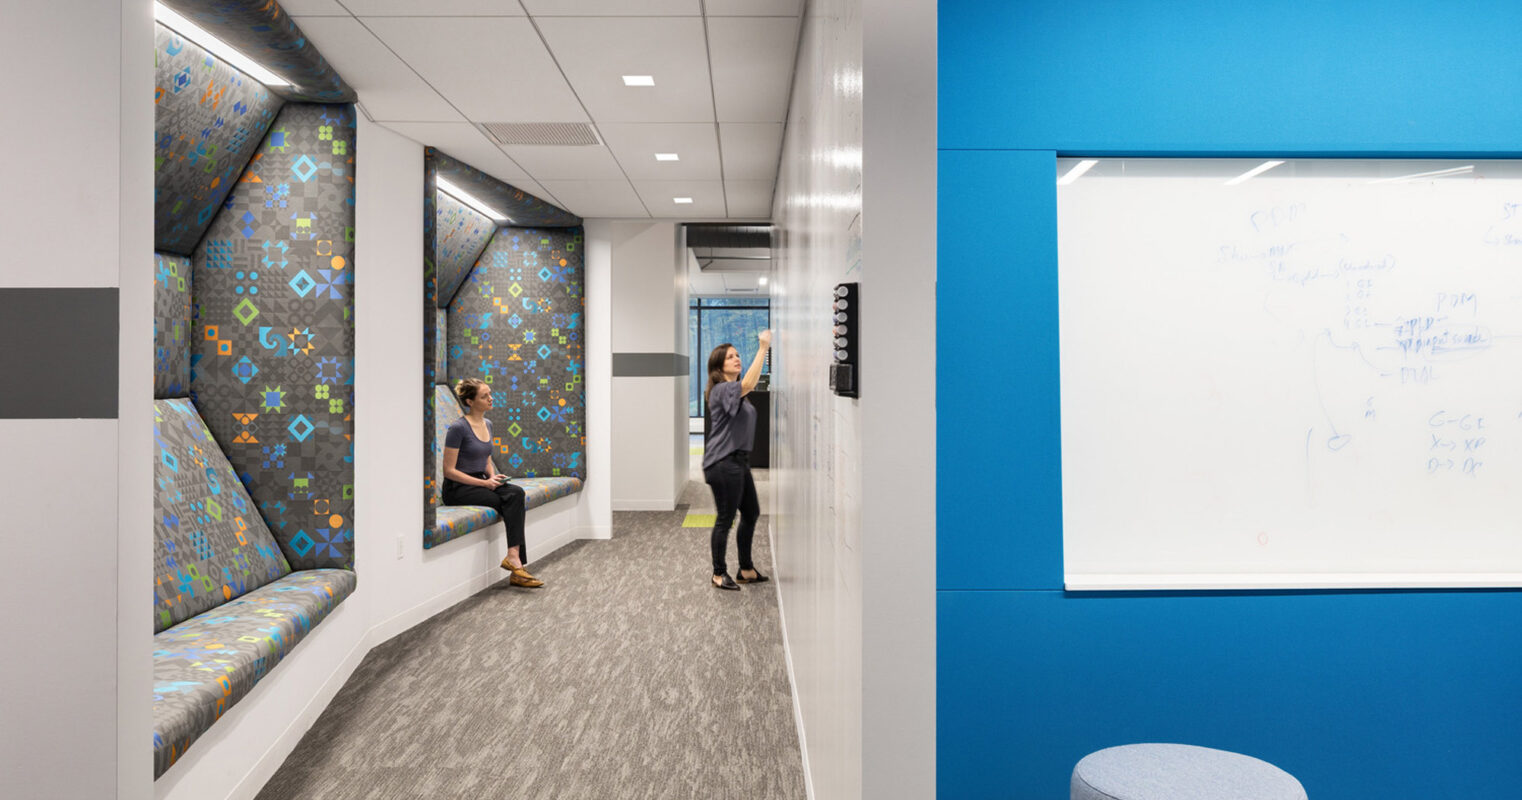 Modern office corridor featuring vibrant geometric-patterned wall upholstery, recessed lighting, and sleek gray flooring. Two professionals engage near a whiteboard reflecting collaborative work in a contemporary workspace.